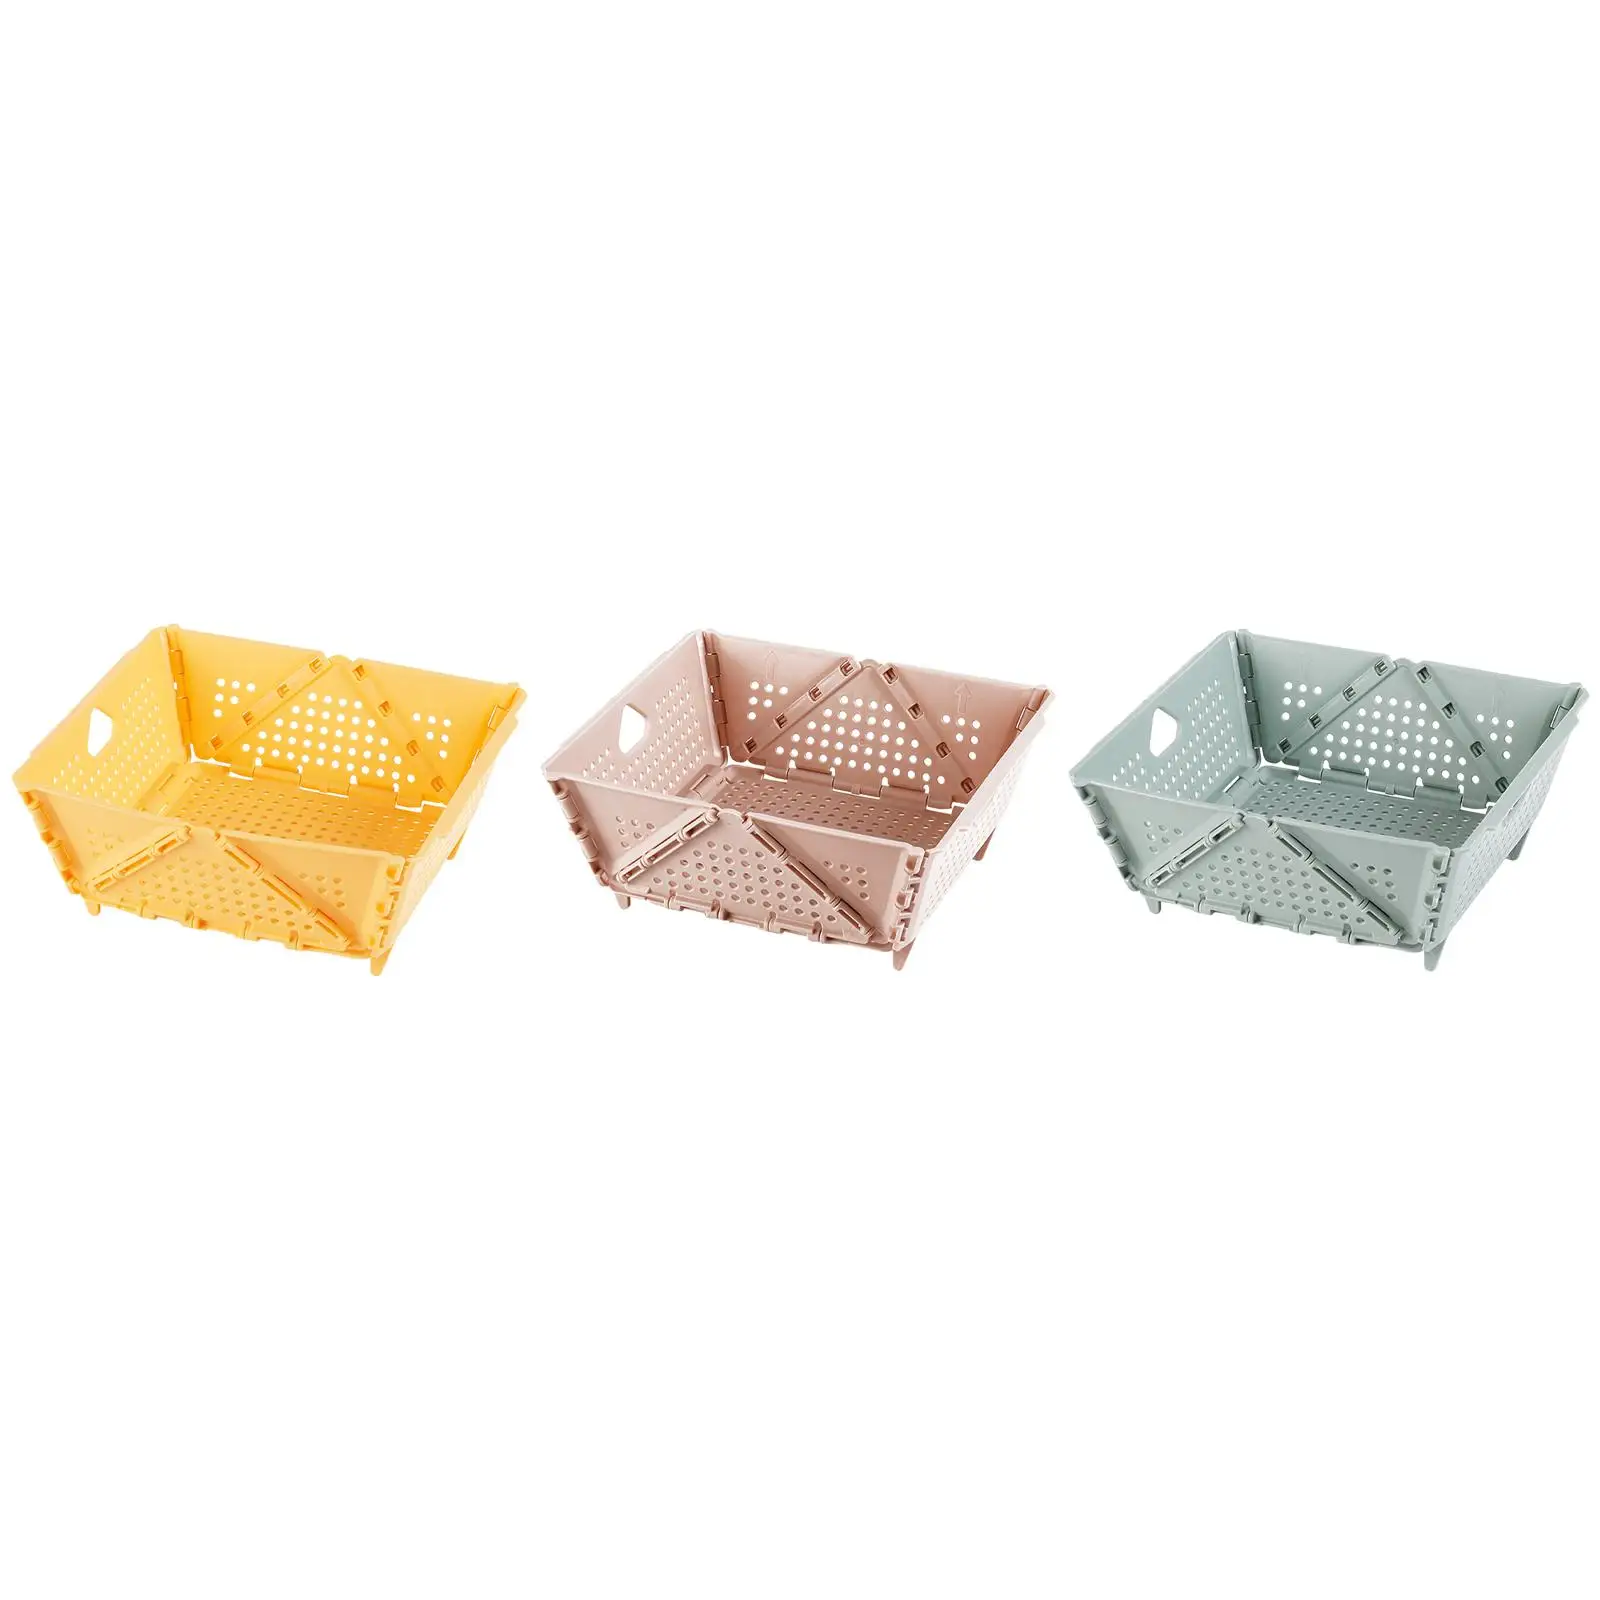 Small Folding Basket Multifunctional with Hollow Handles for Baby Clothes Sundries Desktop Organizer Box for Bedroom Bathroom